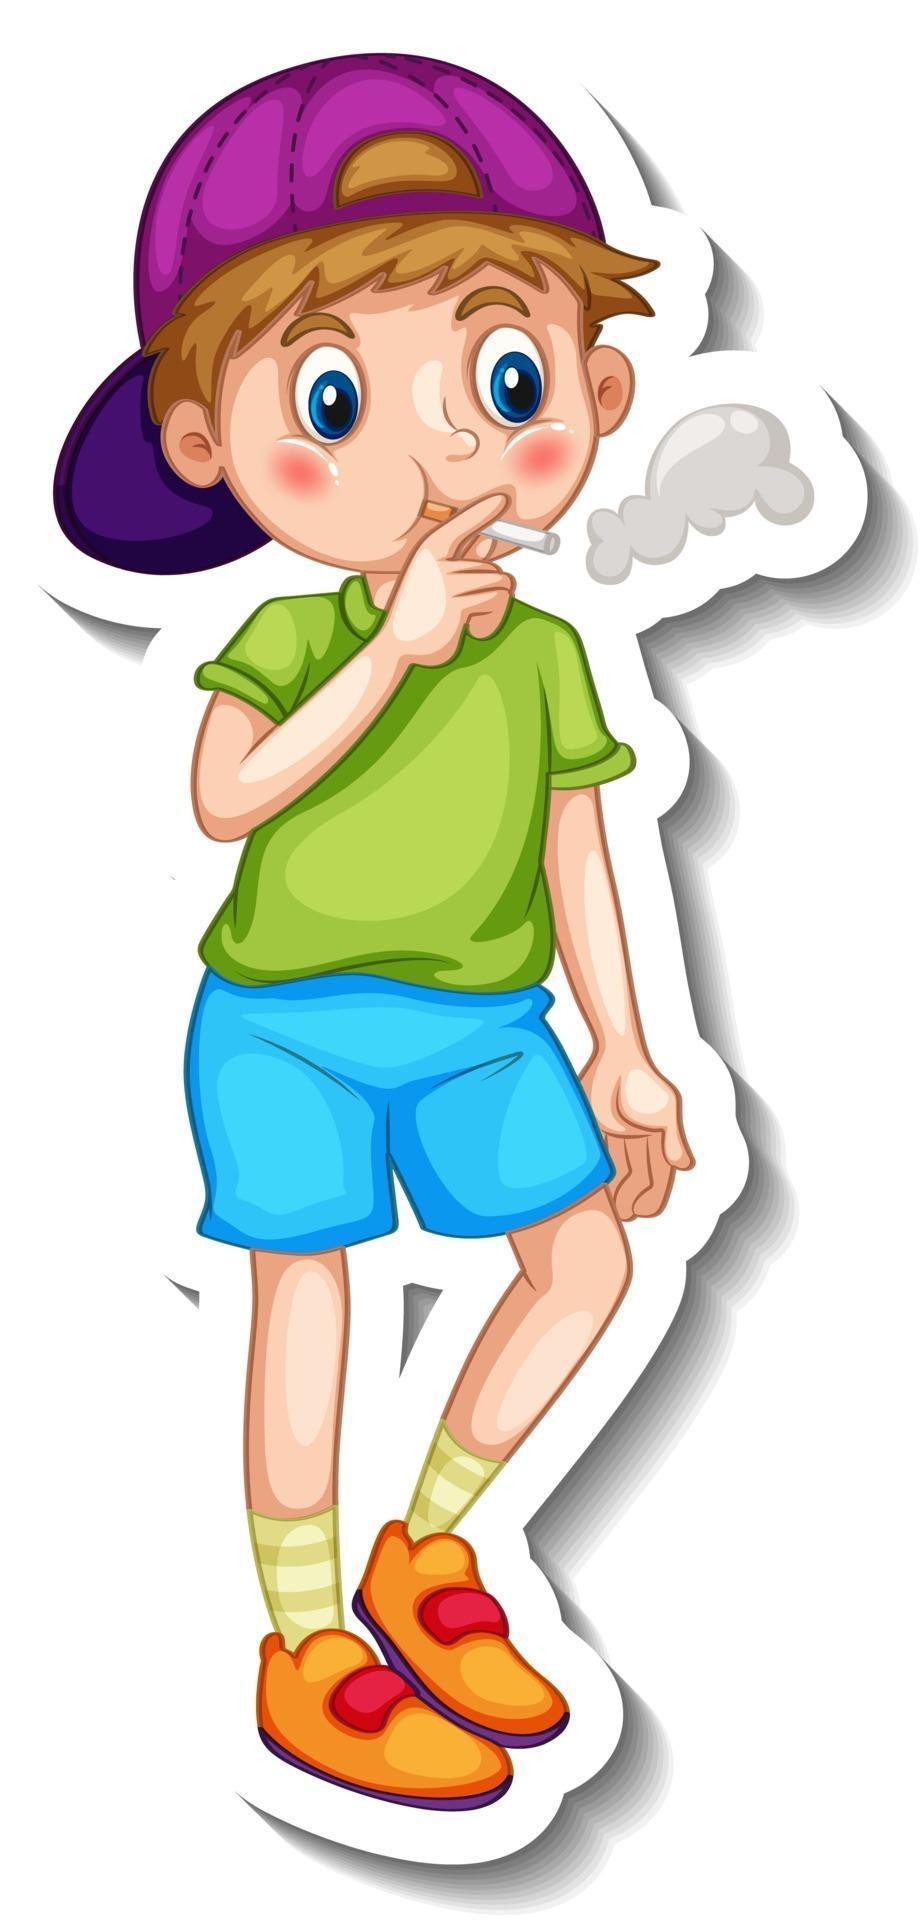 Sticker template with a boy smoking cartoon character isolated 2811888